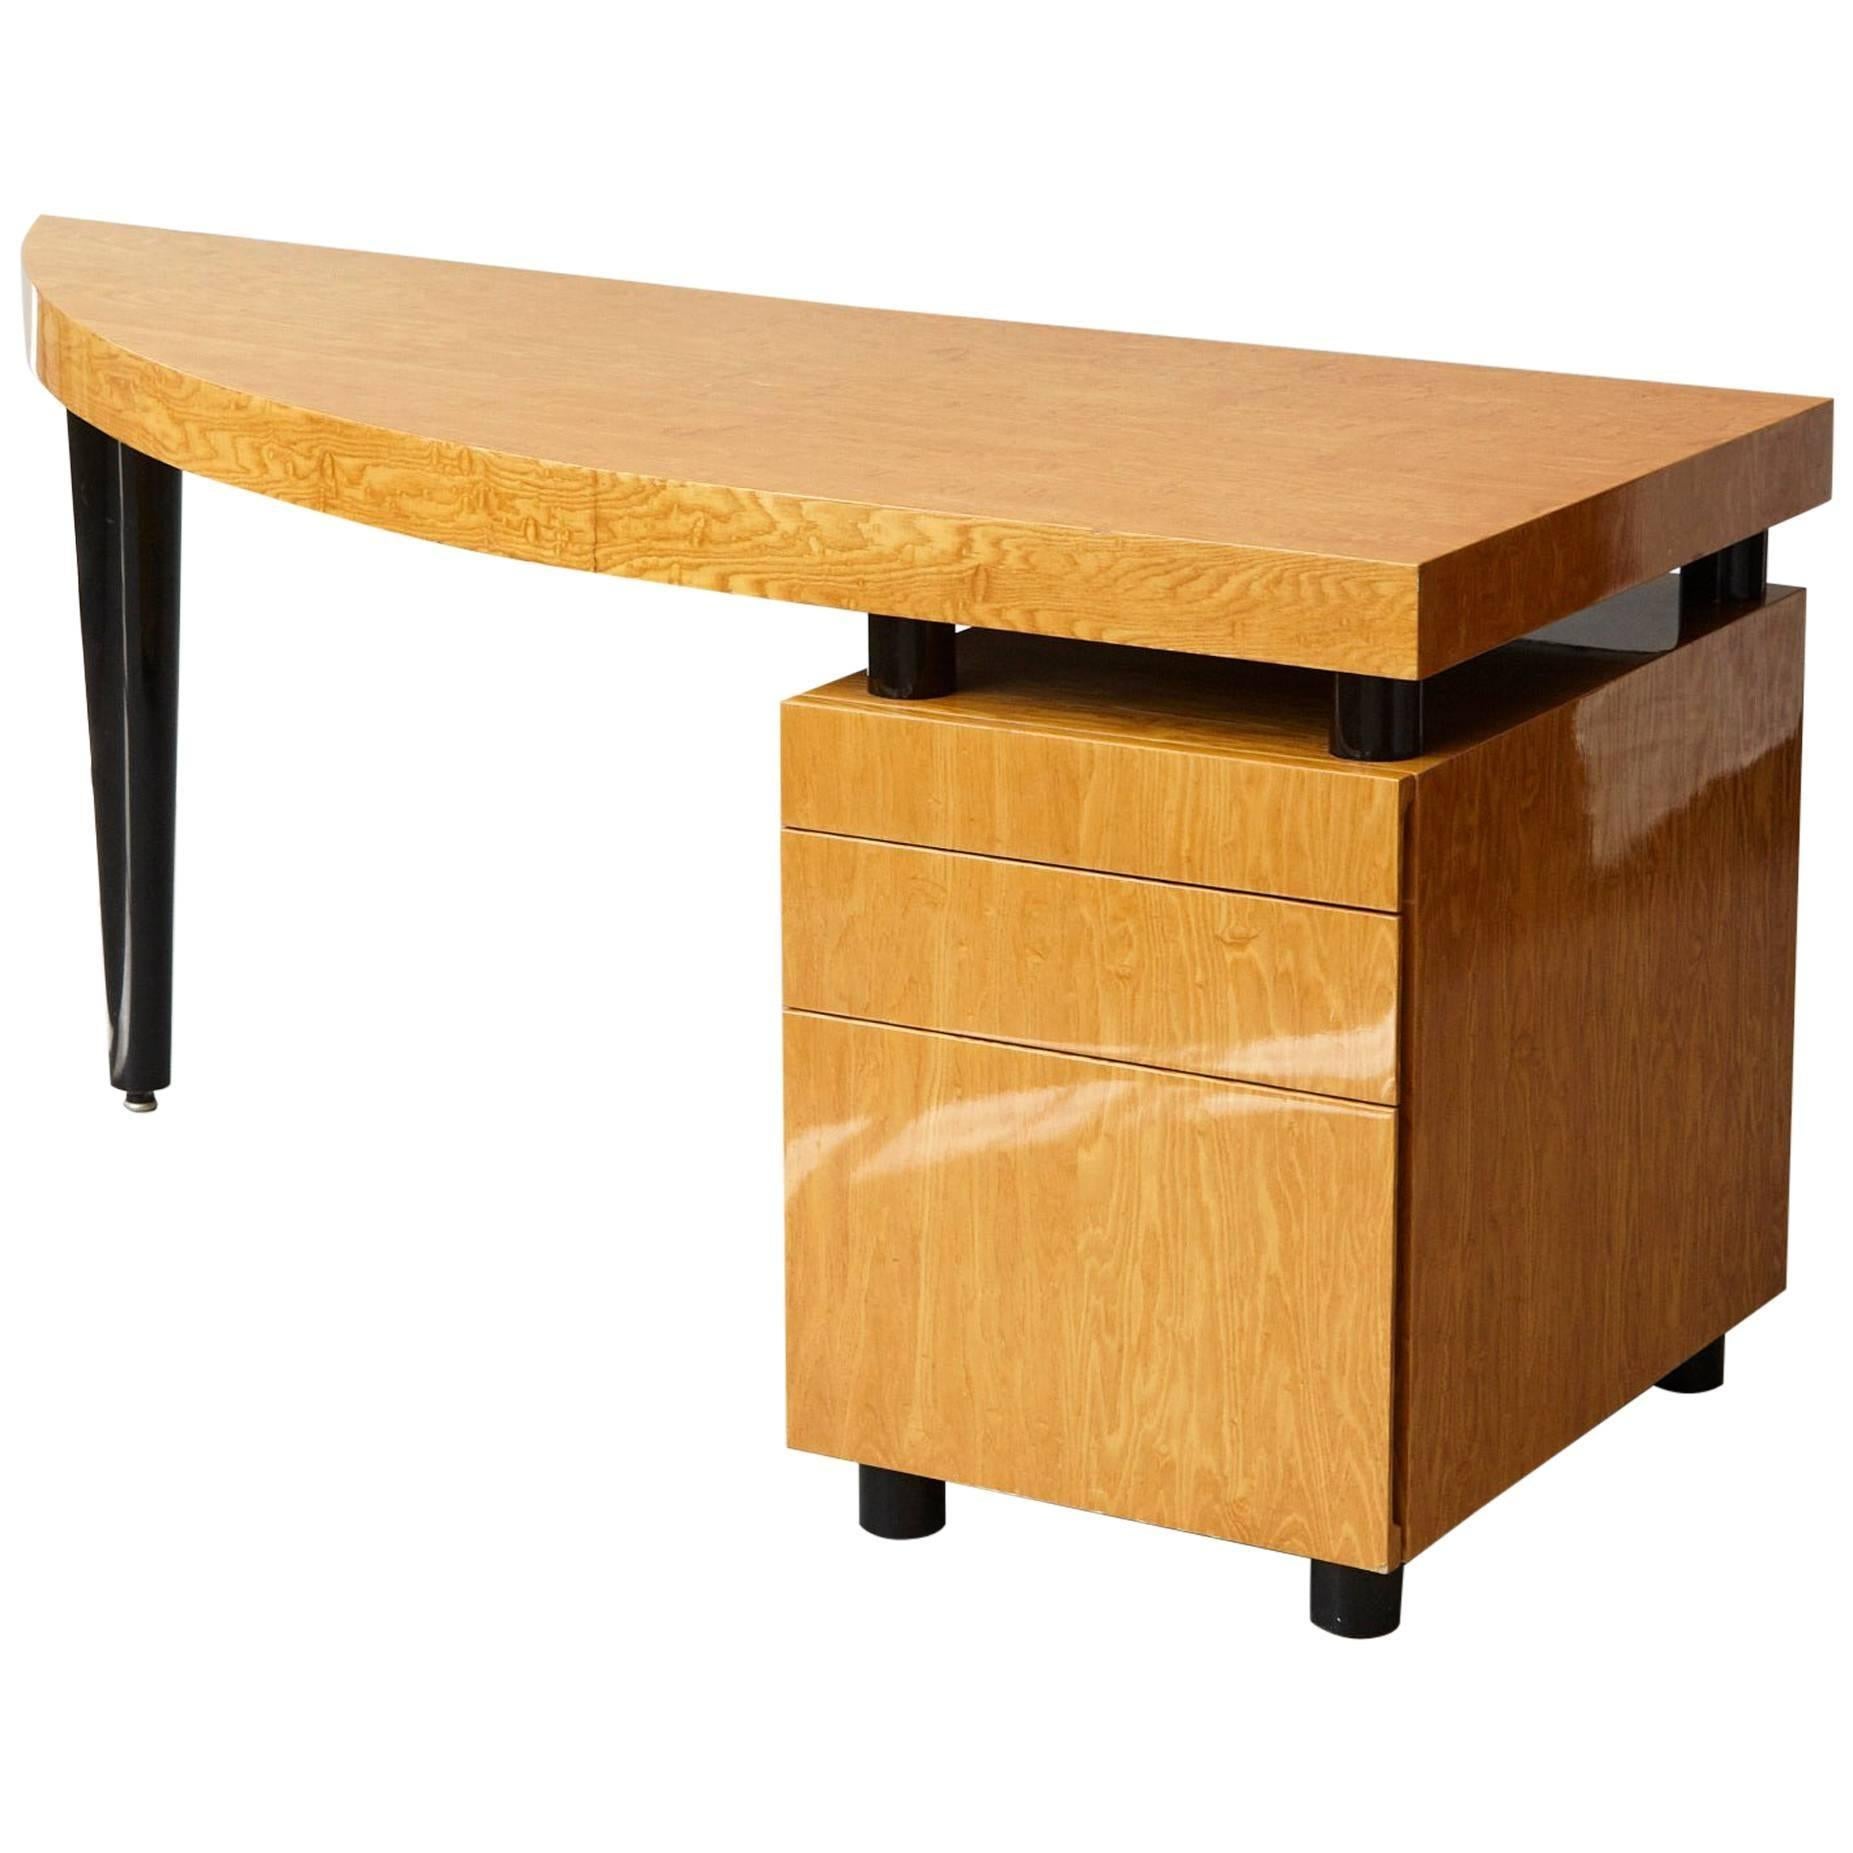 Triangular Memphis Style Inspired Lacquered 'Boca Desk' by Leon Rosen for Pace